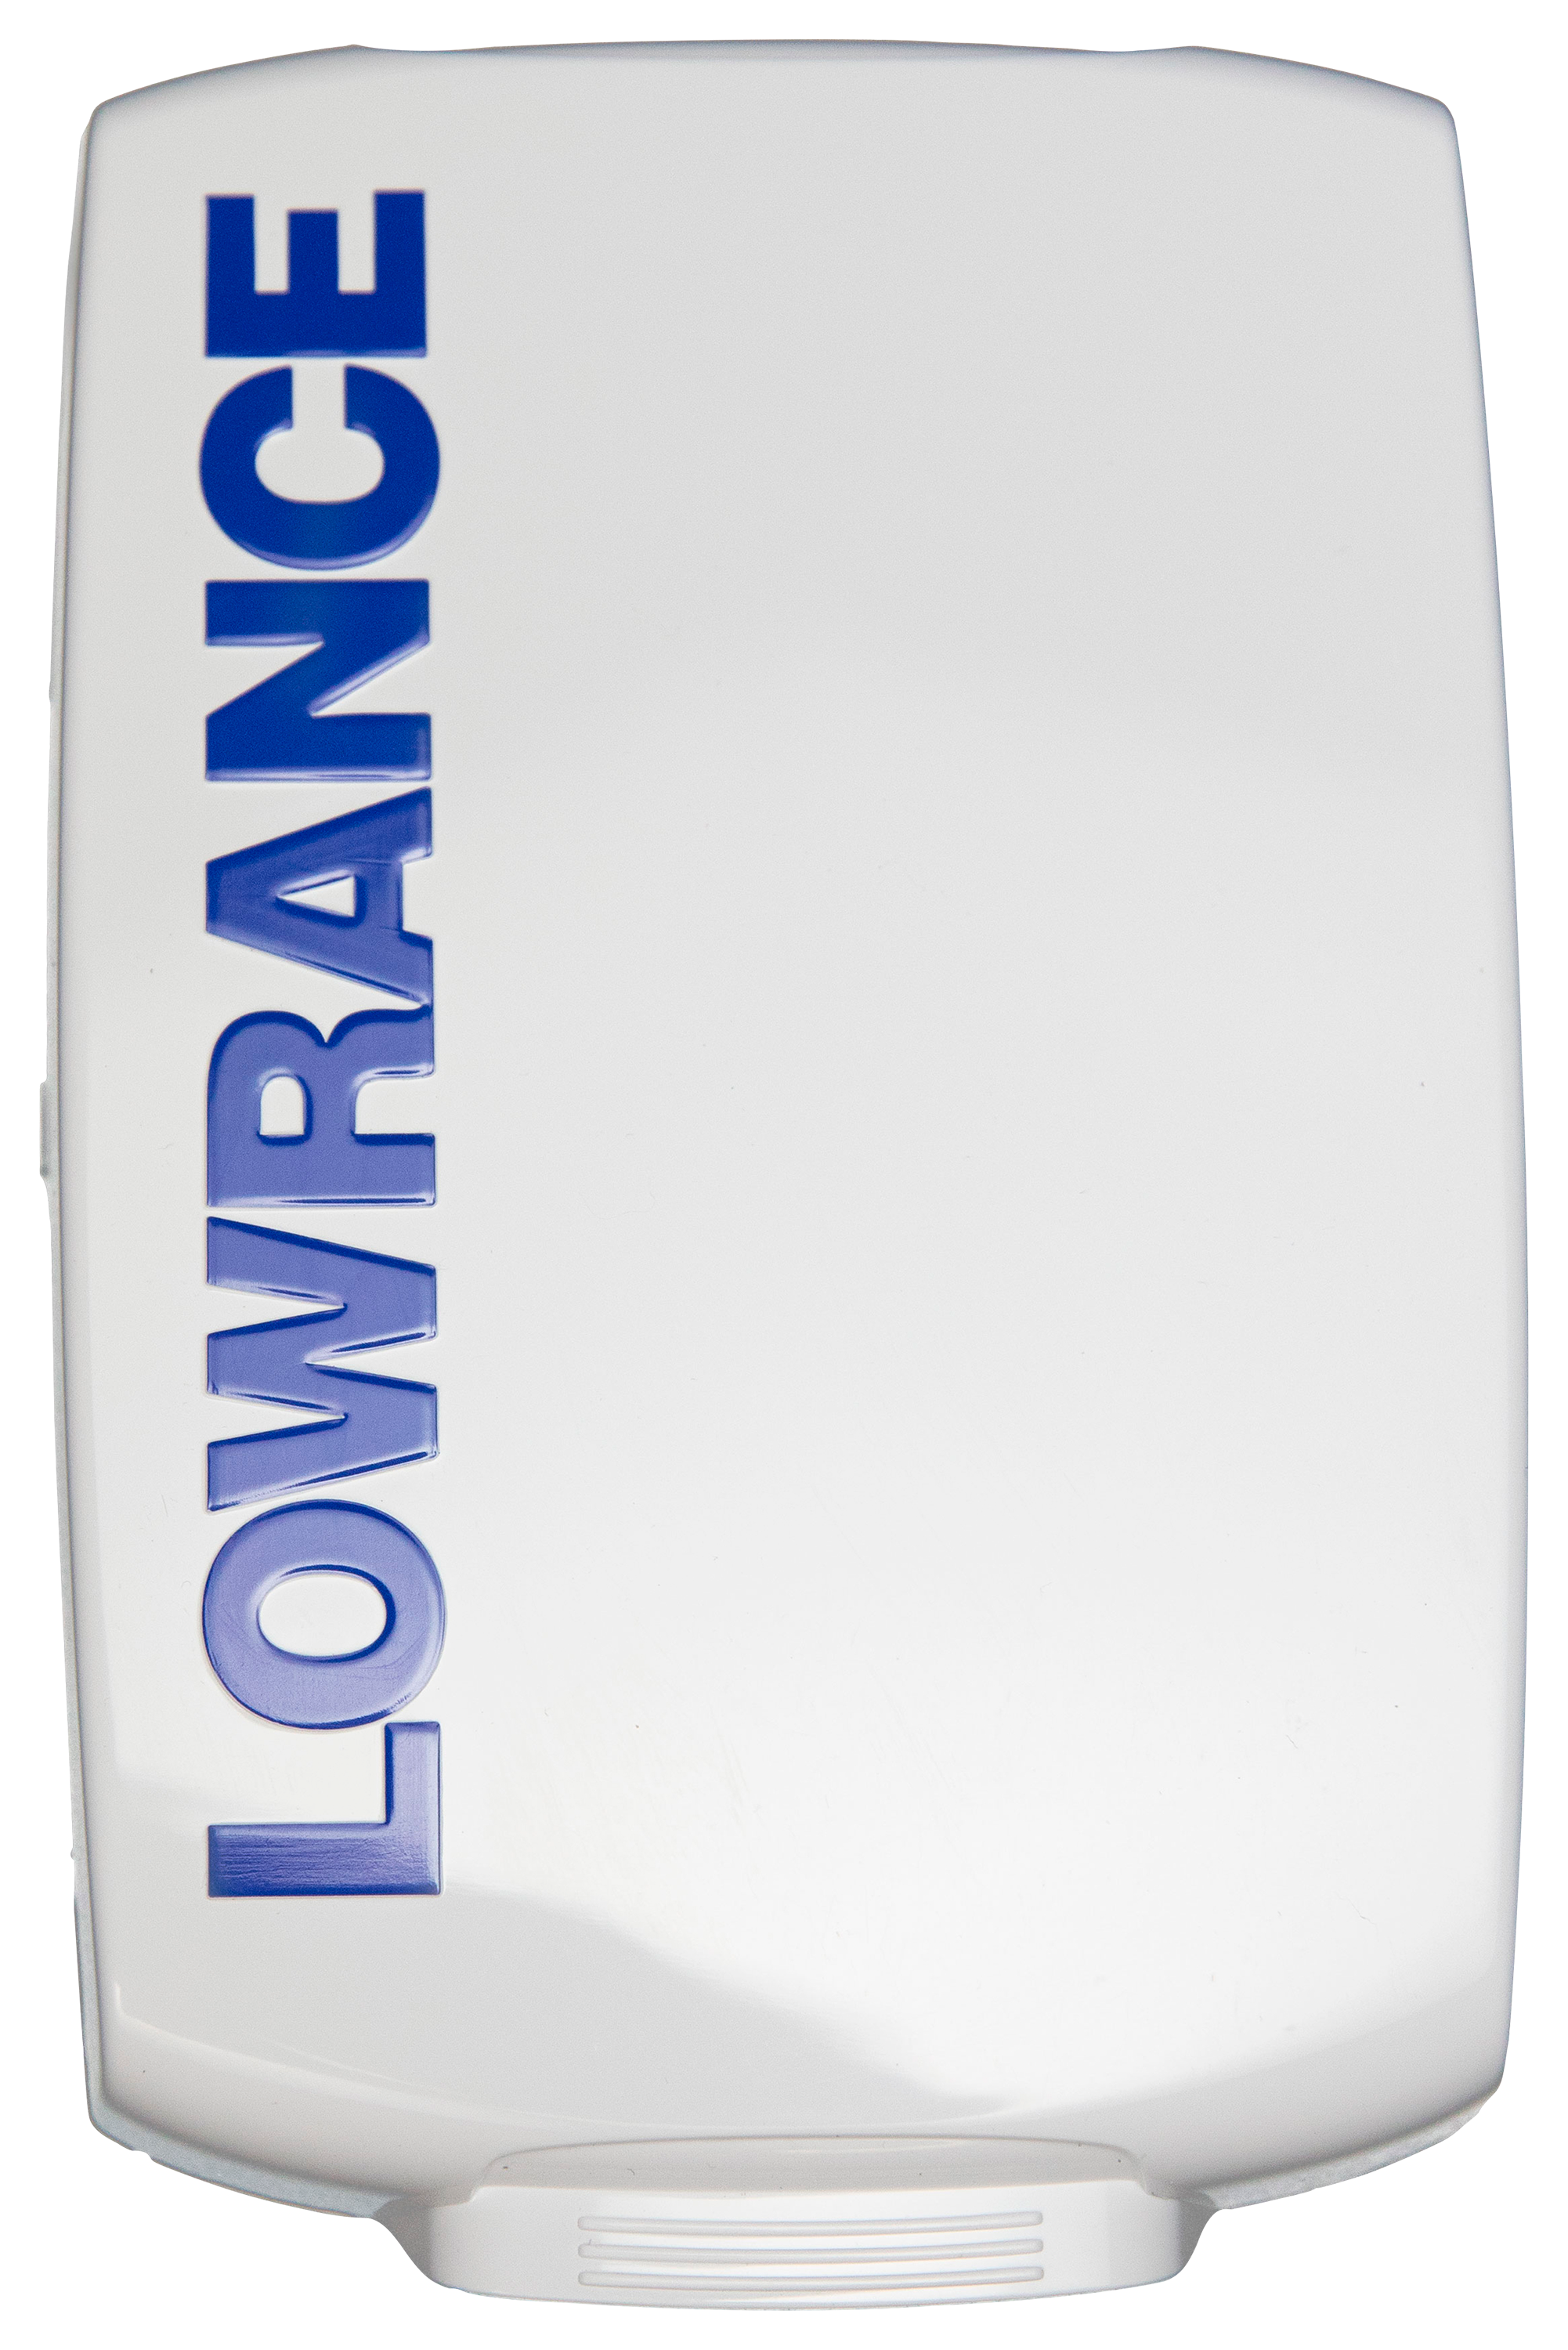 Lowrance Sun Cover for Elite and HOOK 7 Series